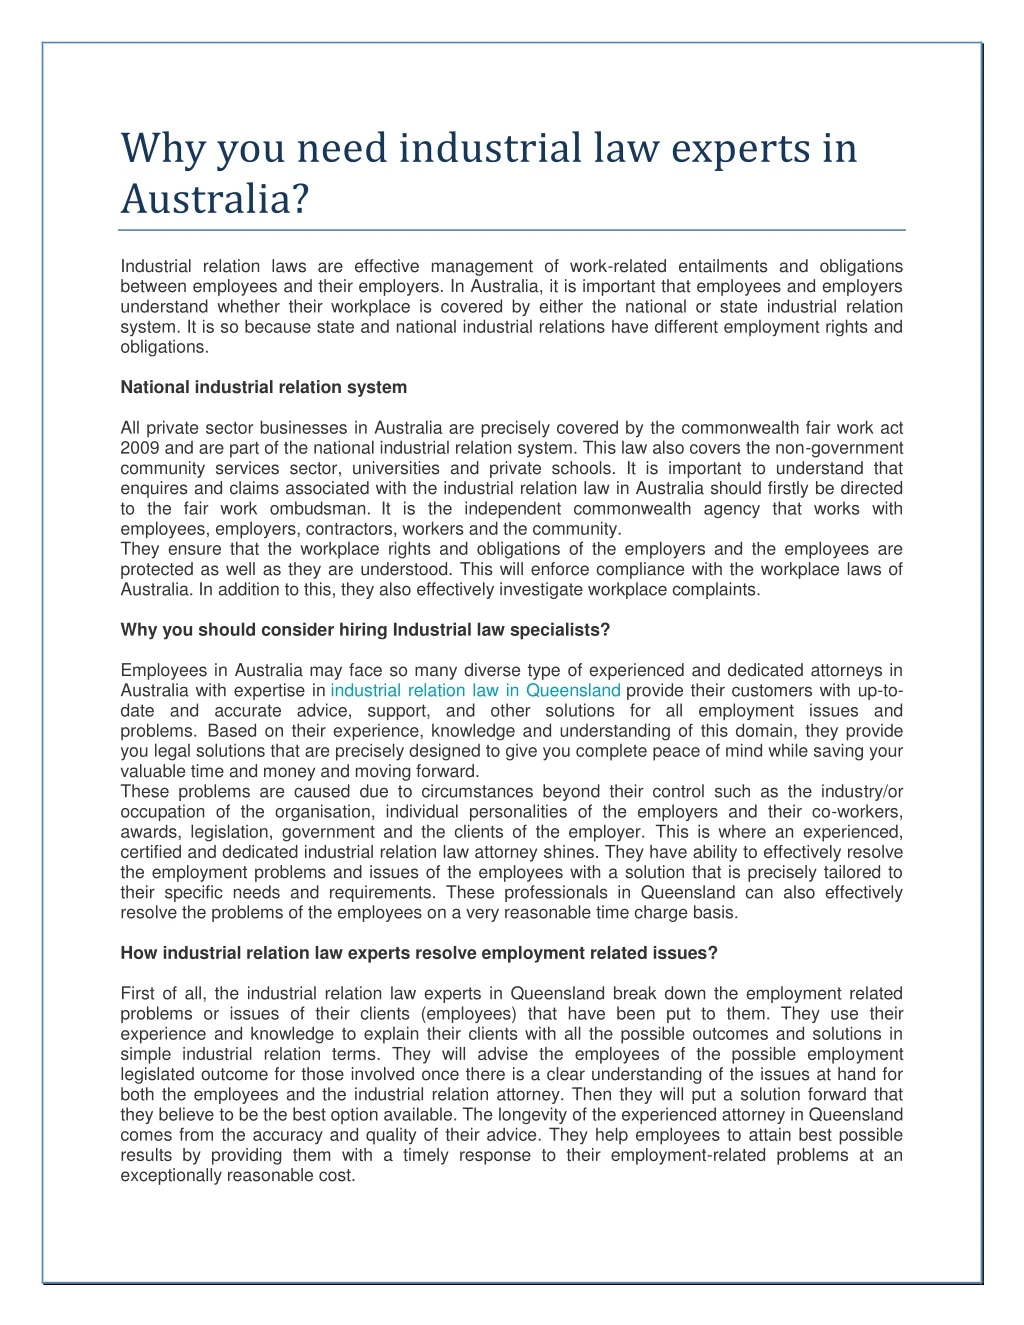 why you need industrial law experts in australia